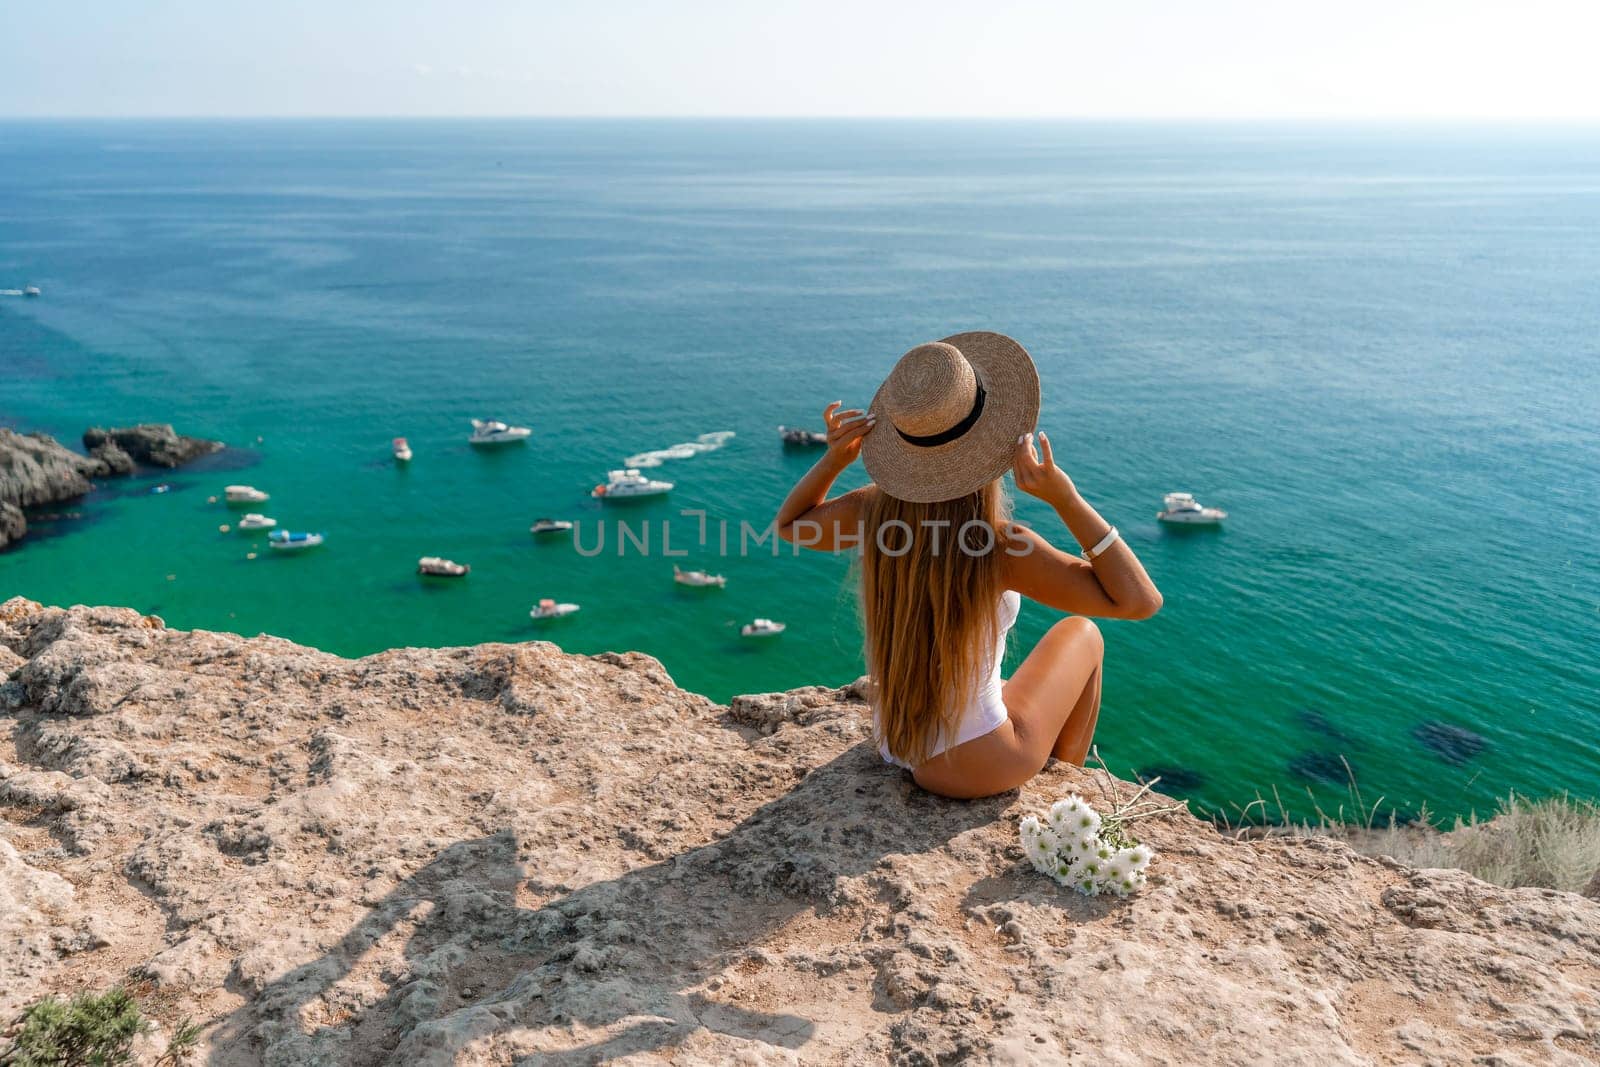 Woman travel sea. Happy woman in a beautiful location poses on a cliff high above the sea, with emerald waters and yachts in the background, while sharing her travel experiences by Matiunina